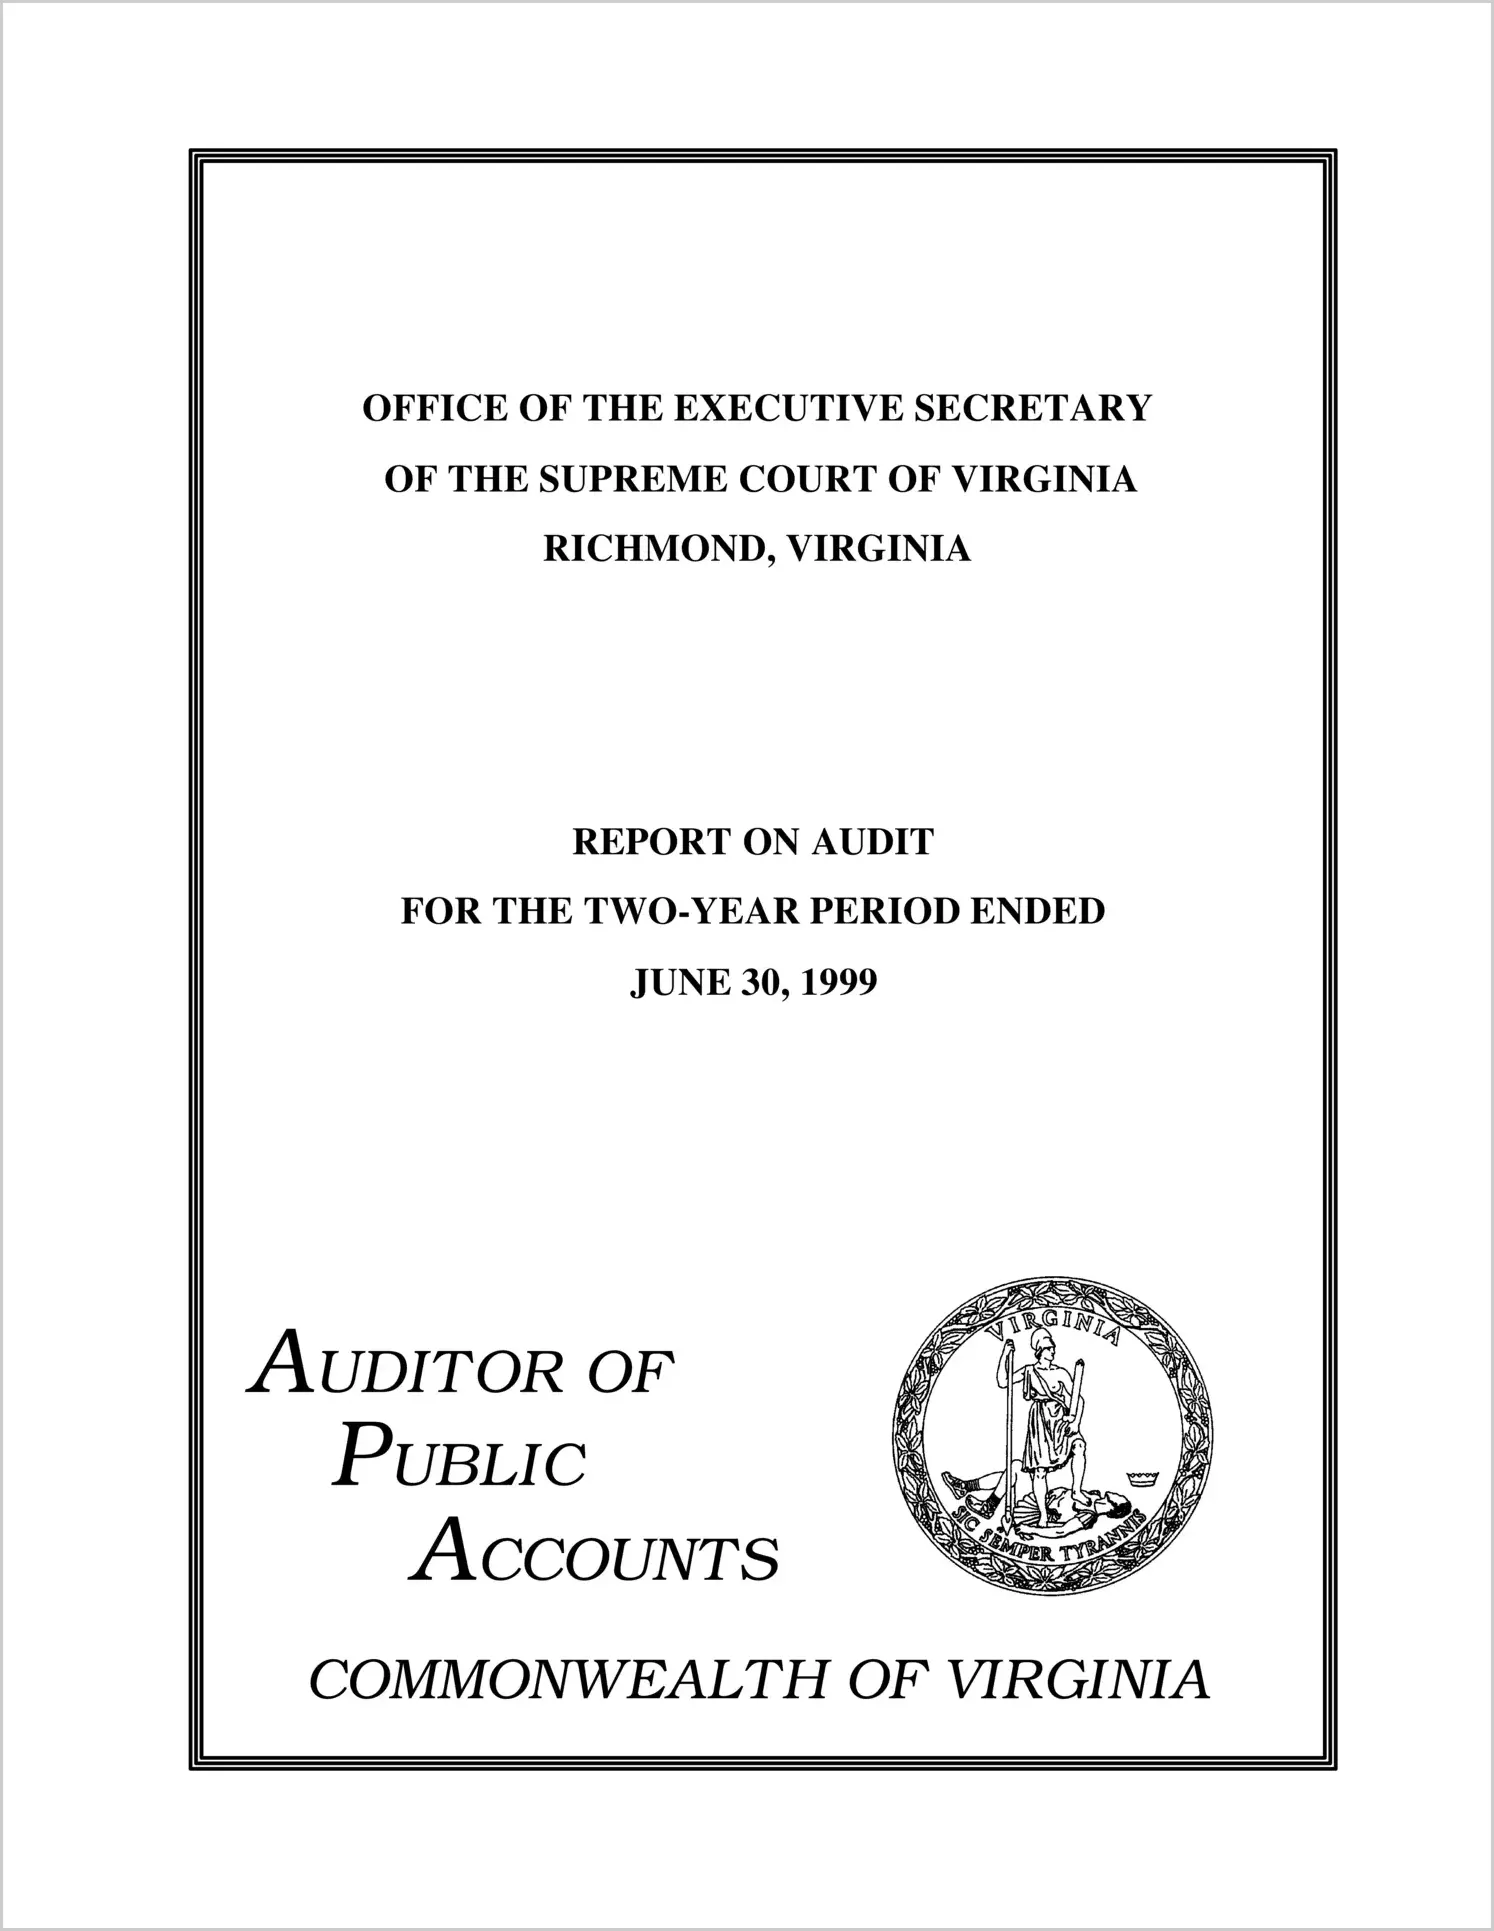 Office of the Executive Secretary of the Supreme Court of Virginia for the two-year period ended June 30, 1999